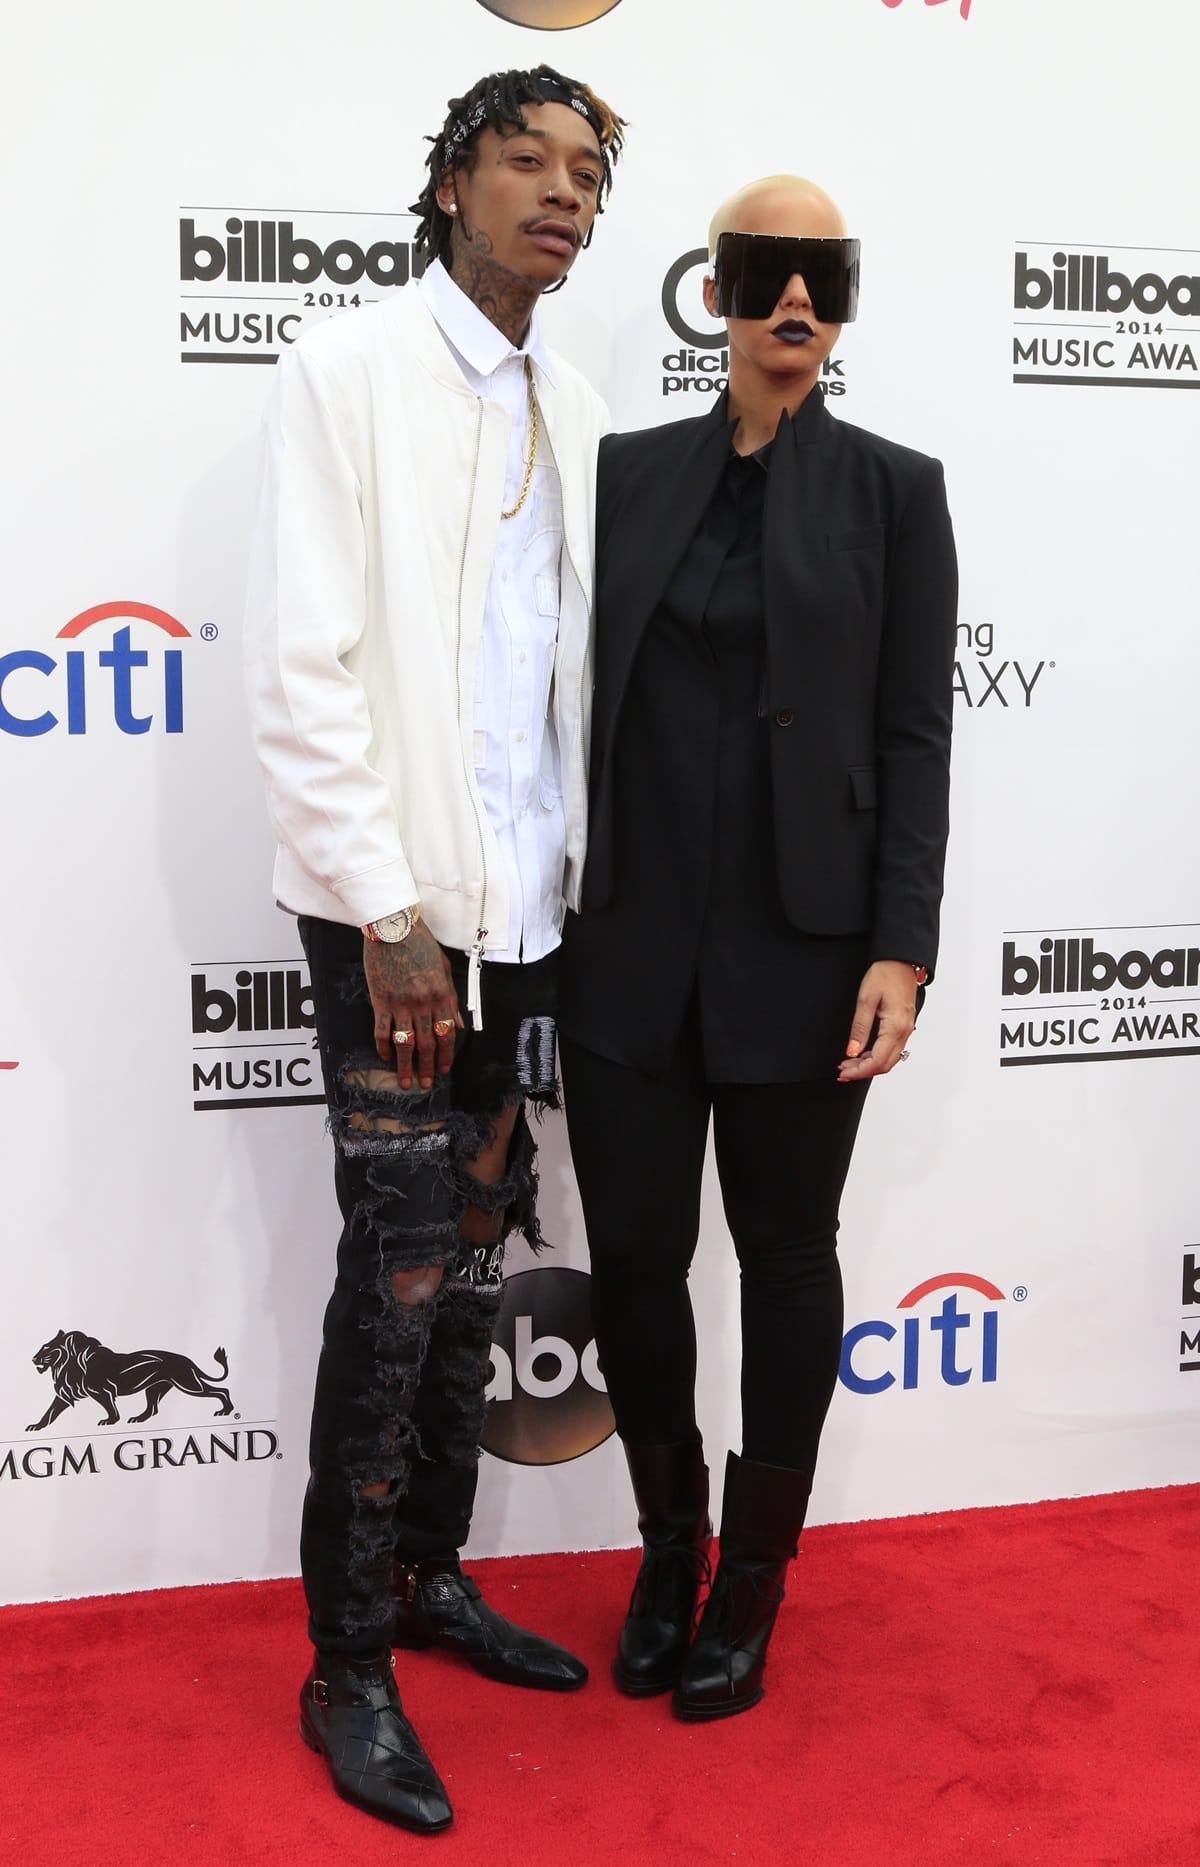 Wiz Khalifa stands notably taller at 6 feet 2 ¾ inches (189.9 cm), compared to Amber Rose's height of 5 feet 7 inches (170.2 cm)